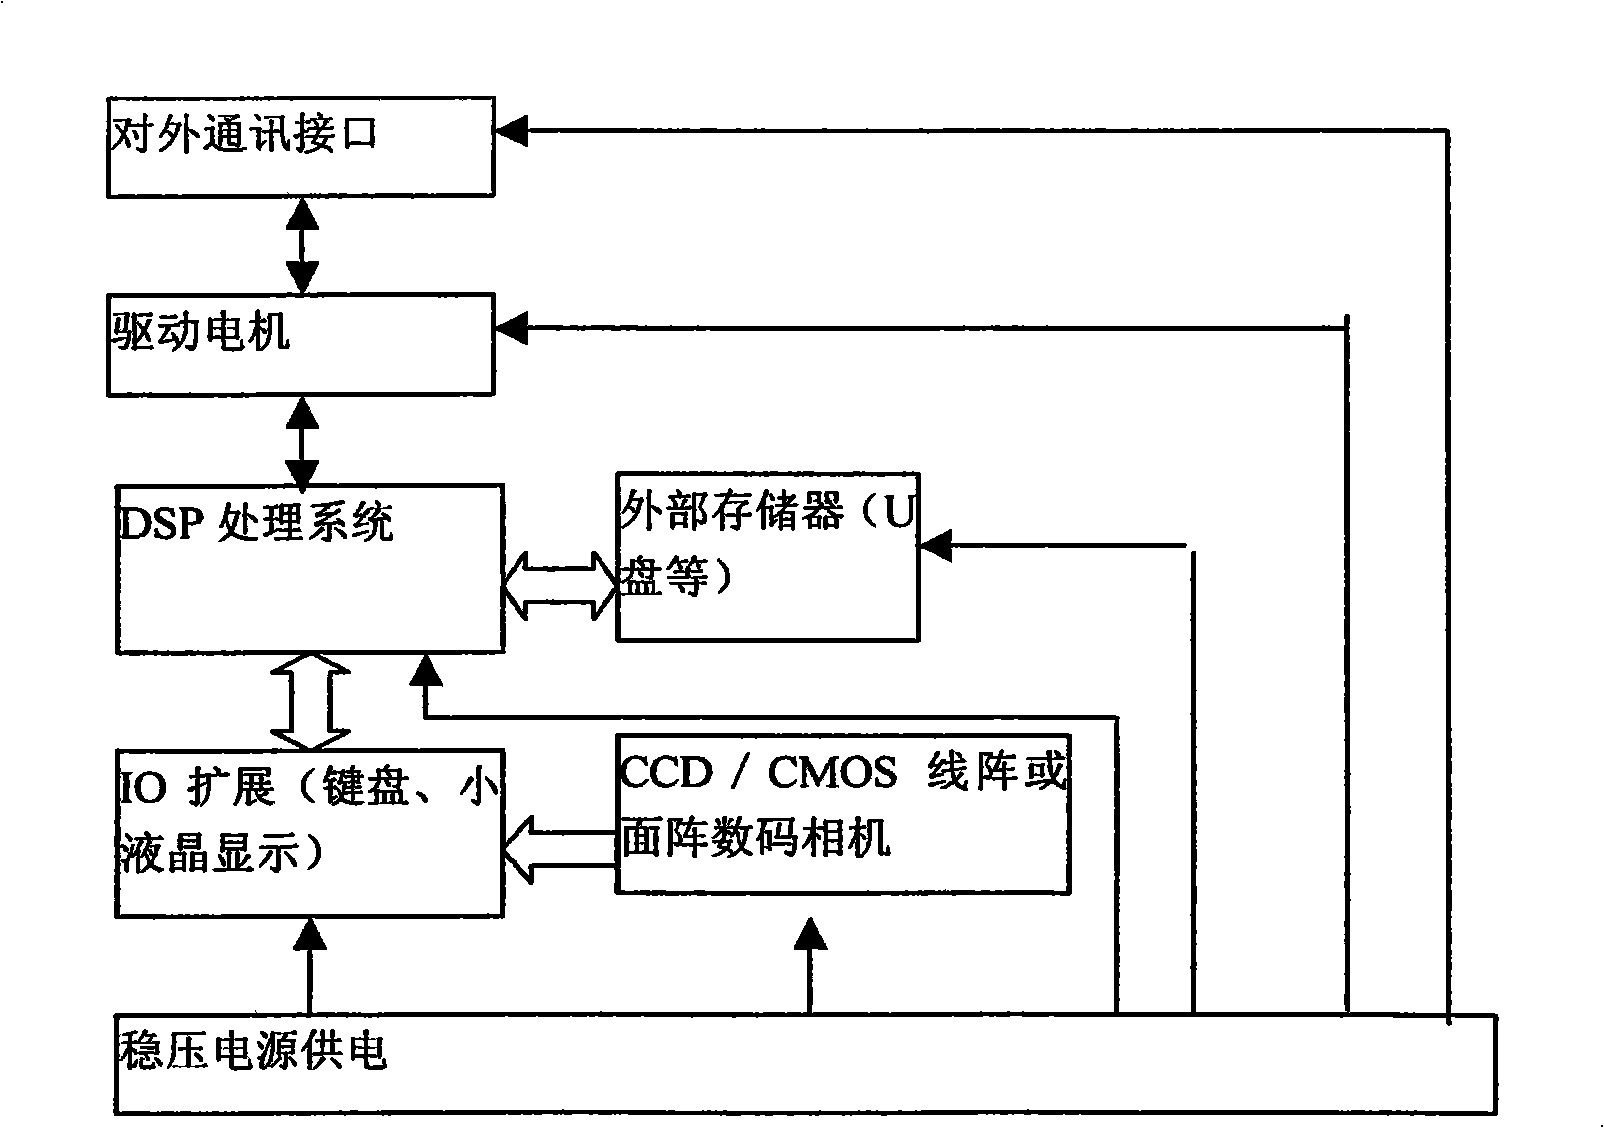 Textile weaving machine on-line quality monitoring method based on computer pattern recognition principle